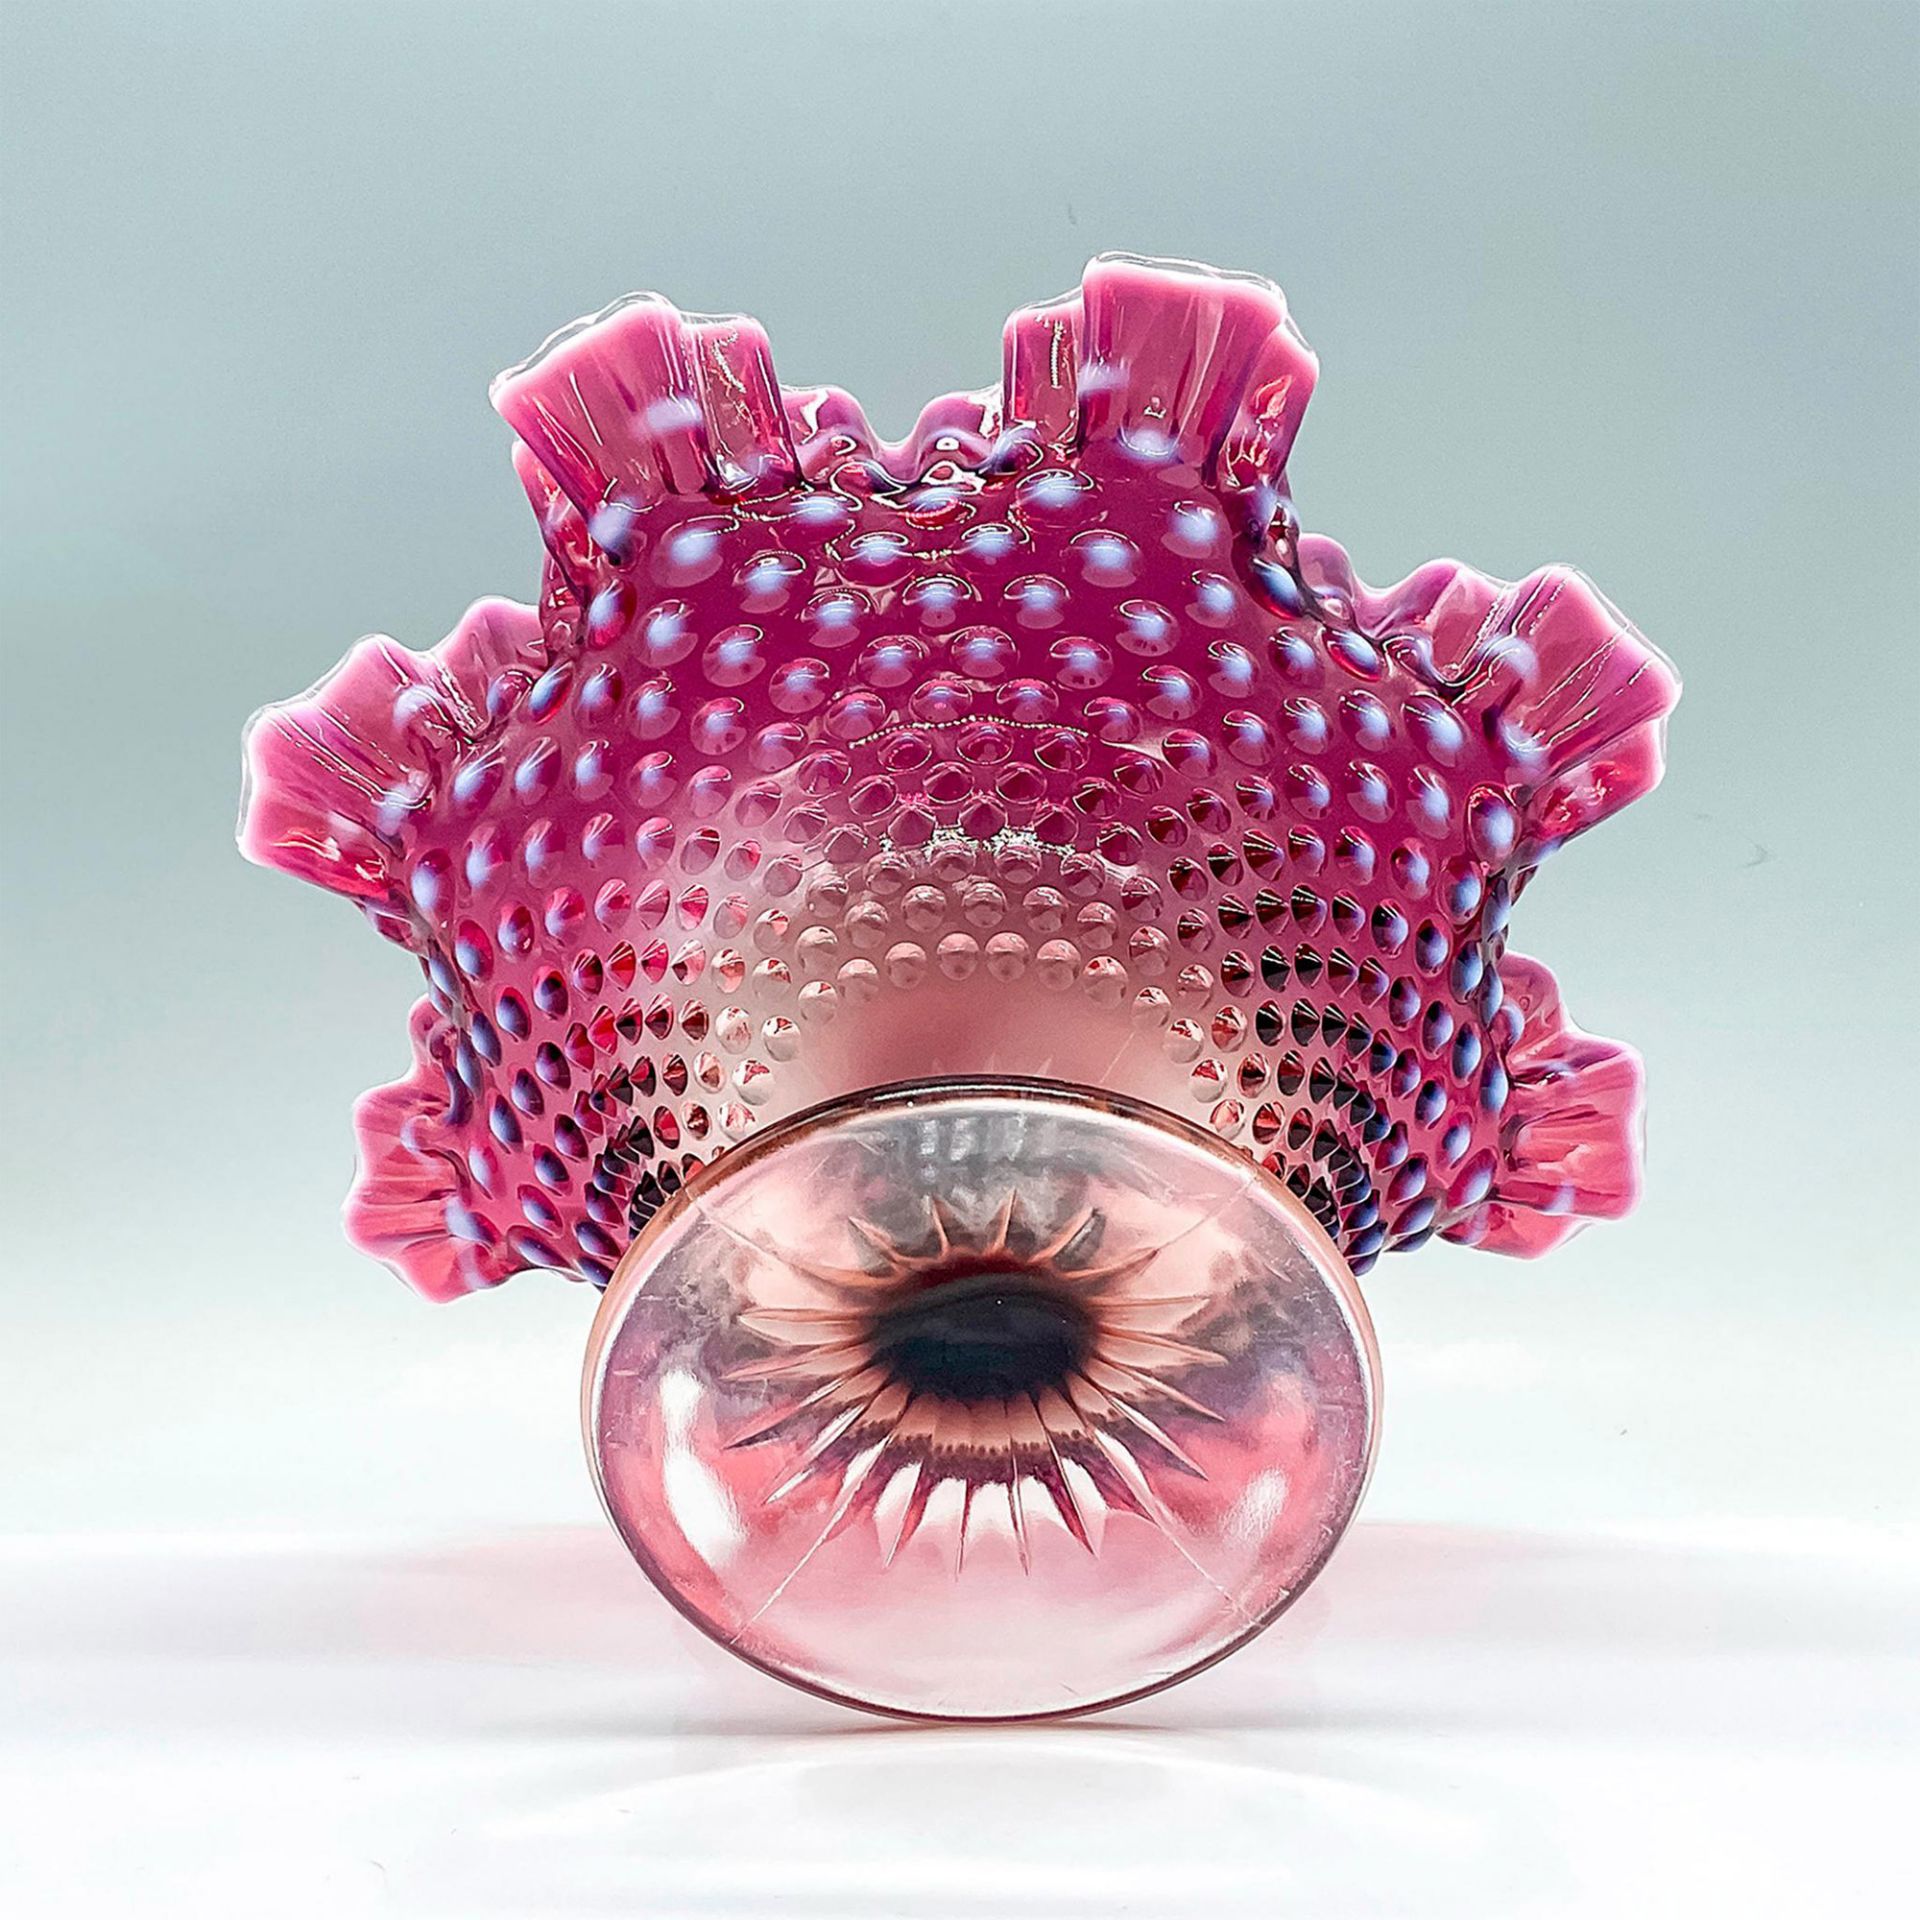 Fenton Glass Opalescent Footed Bowl, Hobnail Plum - Image 3 of 3